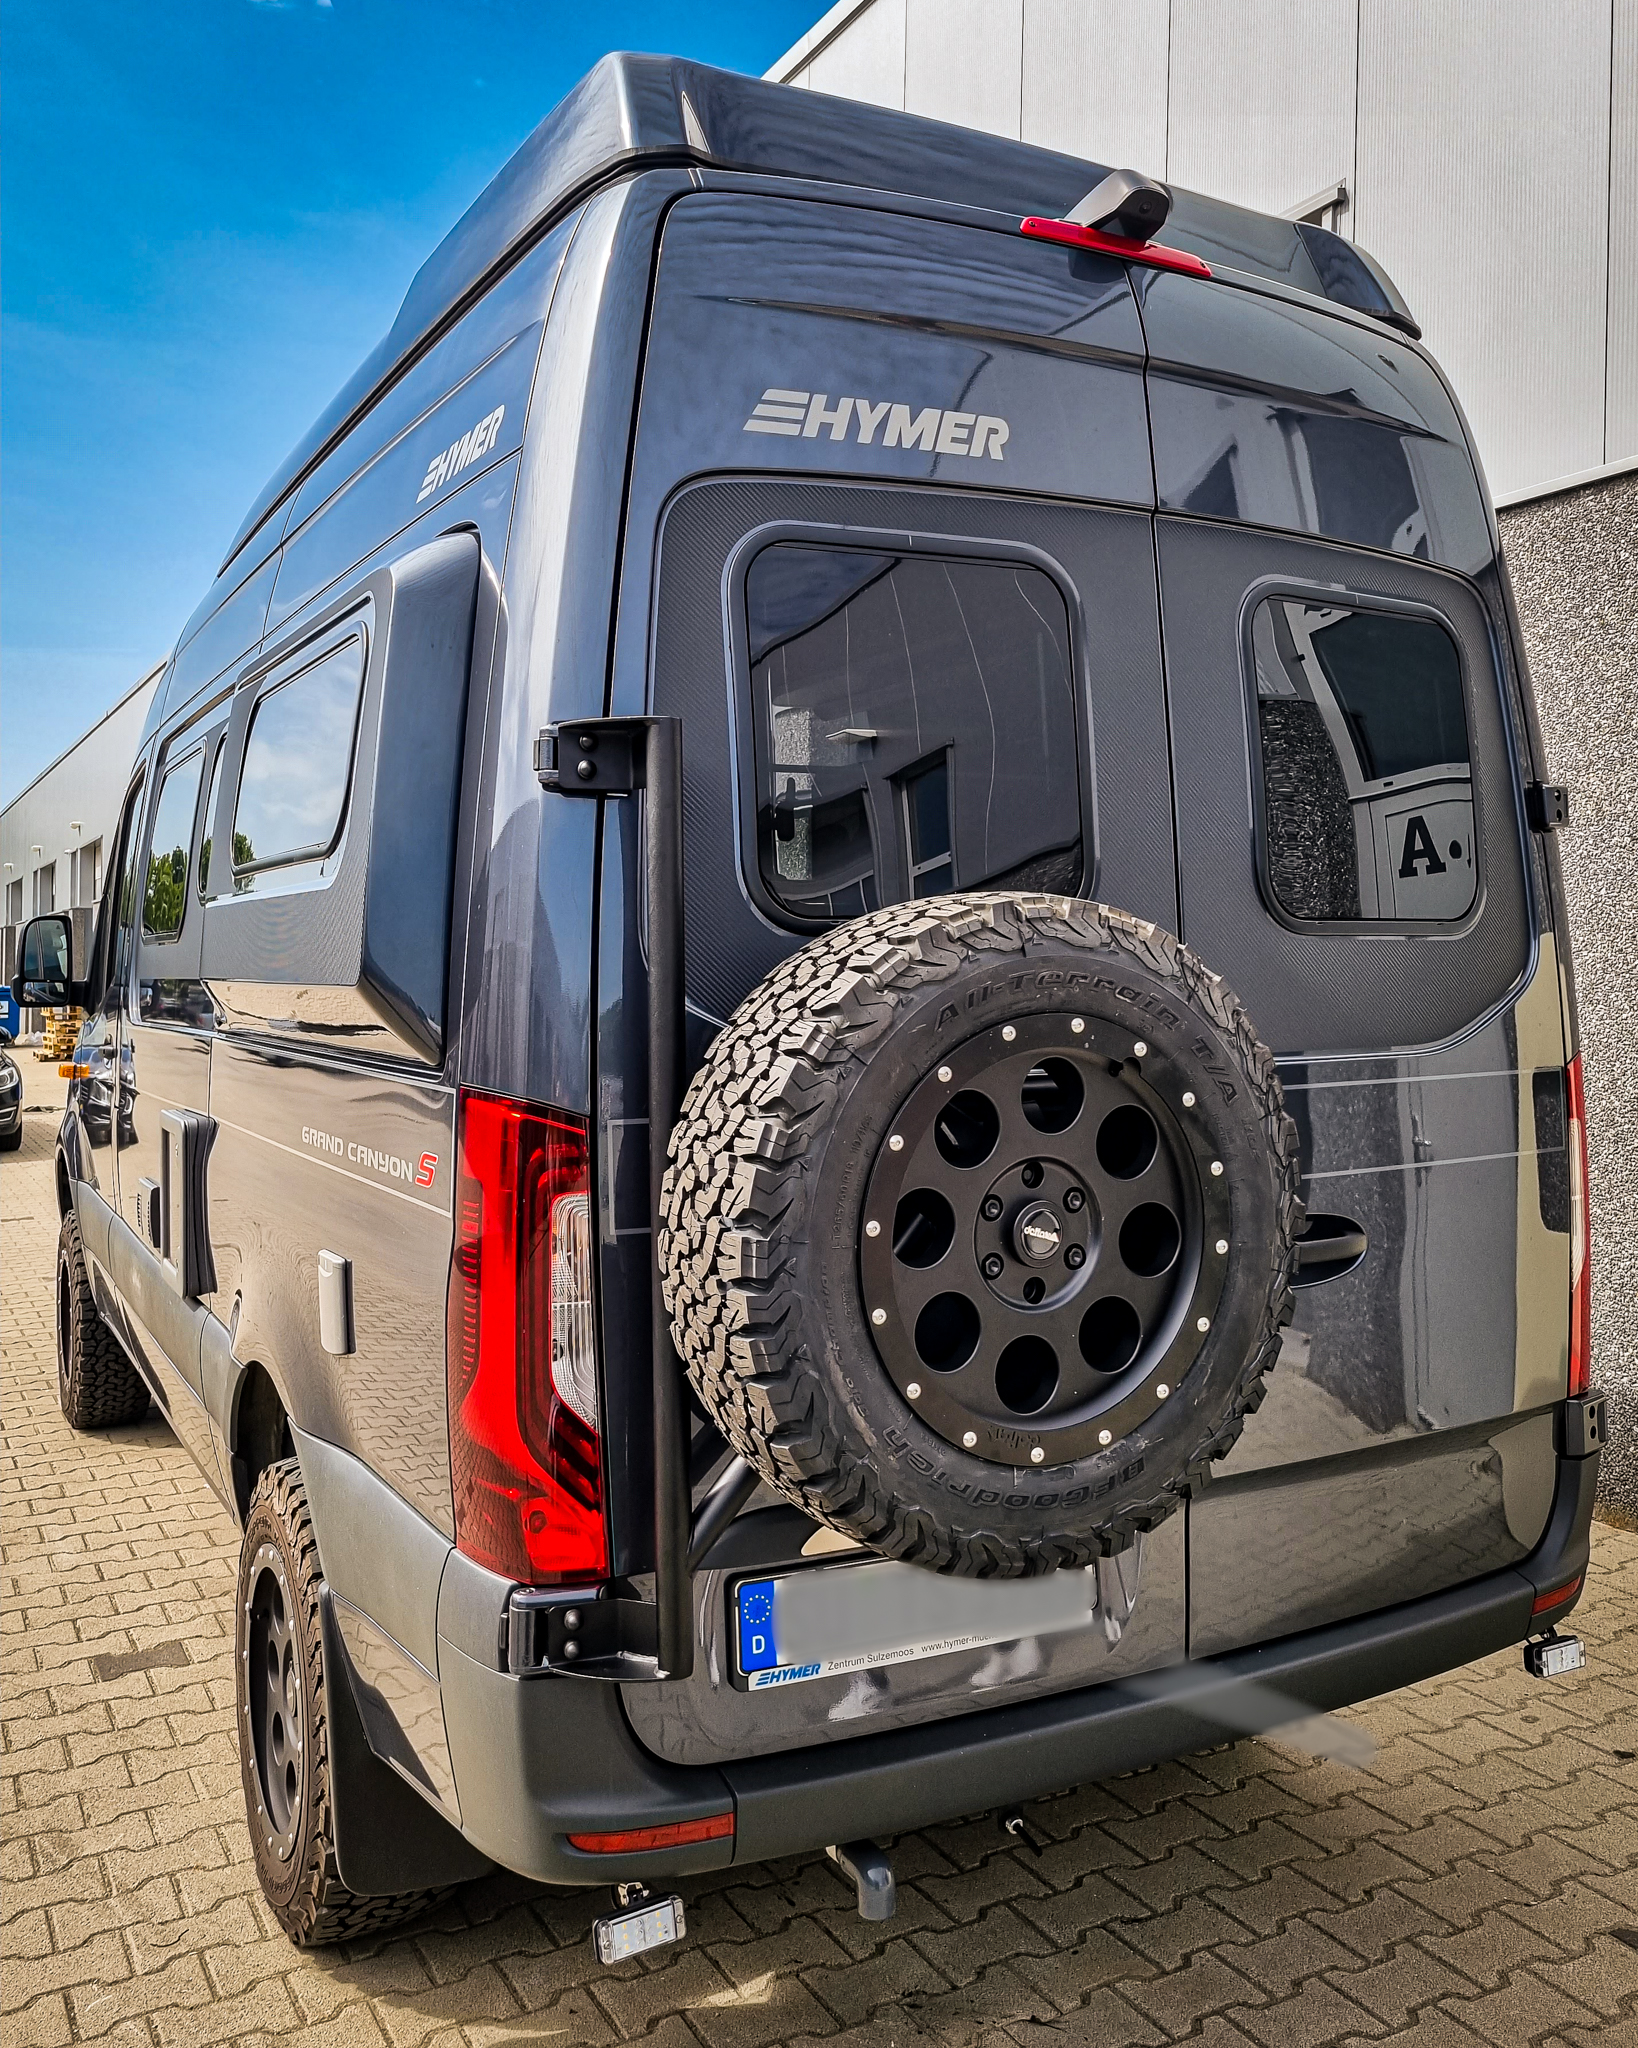 Dutchvanparts Bandendrager Mercedes Sprinter W907 (VS30) op een Hymer Grand Canyon S.